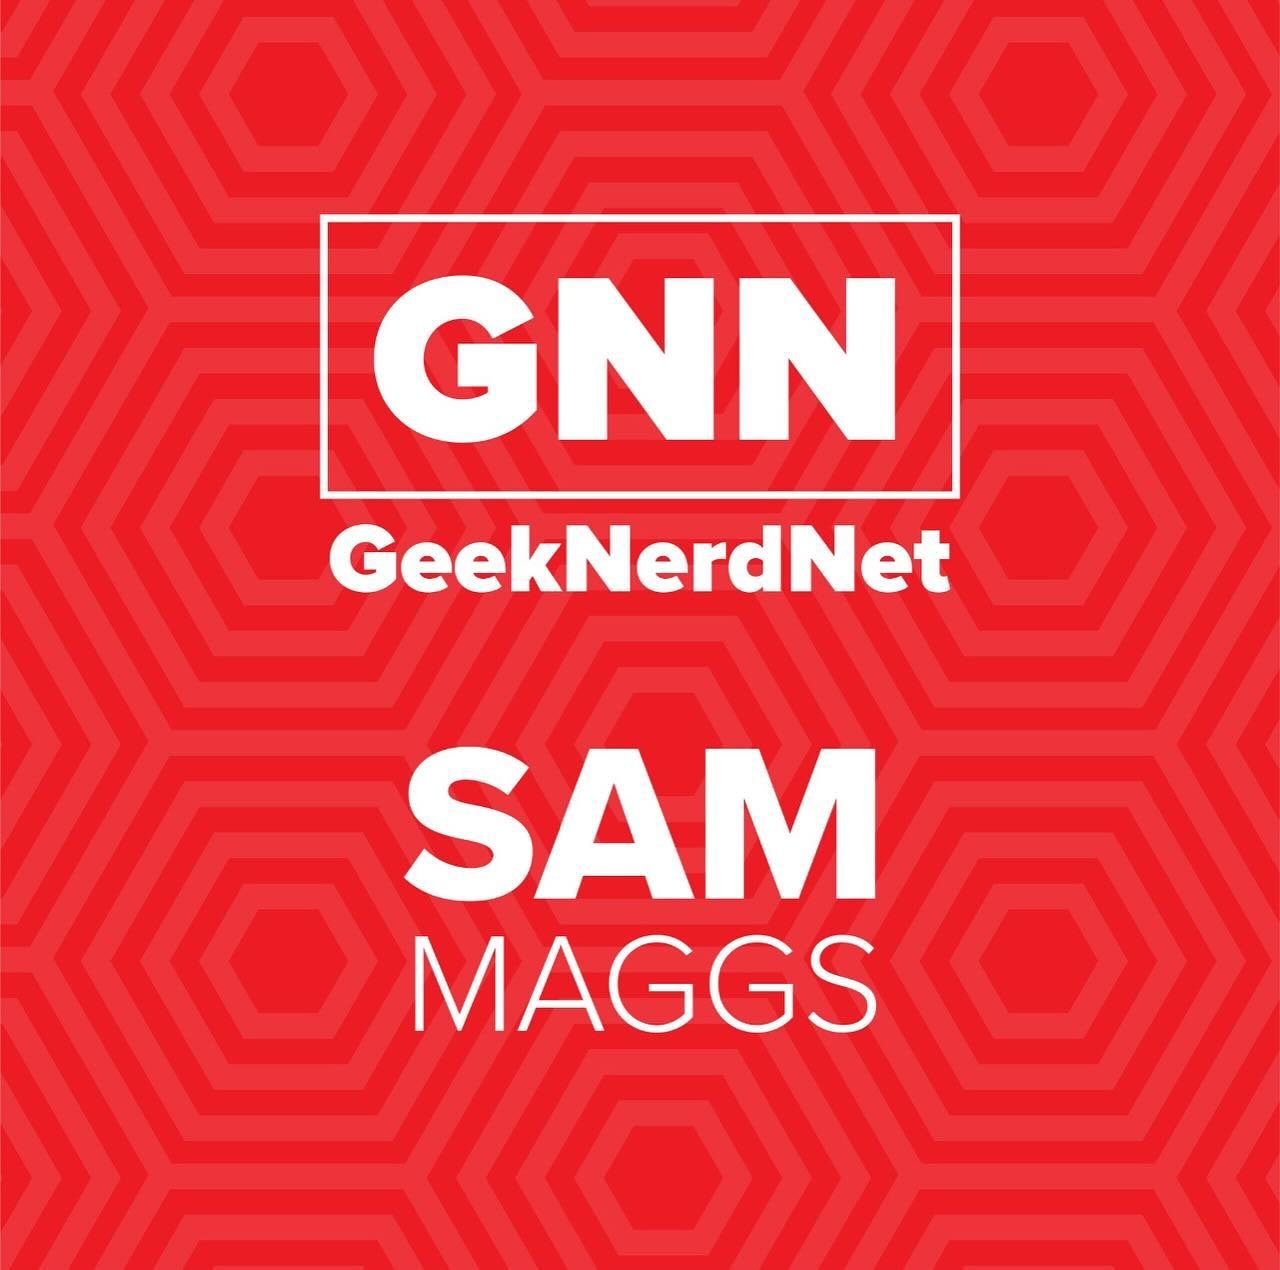 A great chat with @sammaggs: Writer, and role model extraordinaire to many. 
Find it on our site. Follow link in bio.
#ComicsChat #ConventionLife